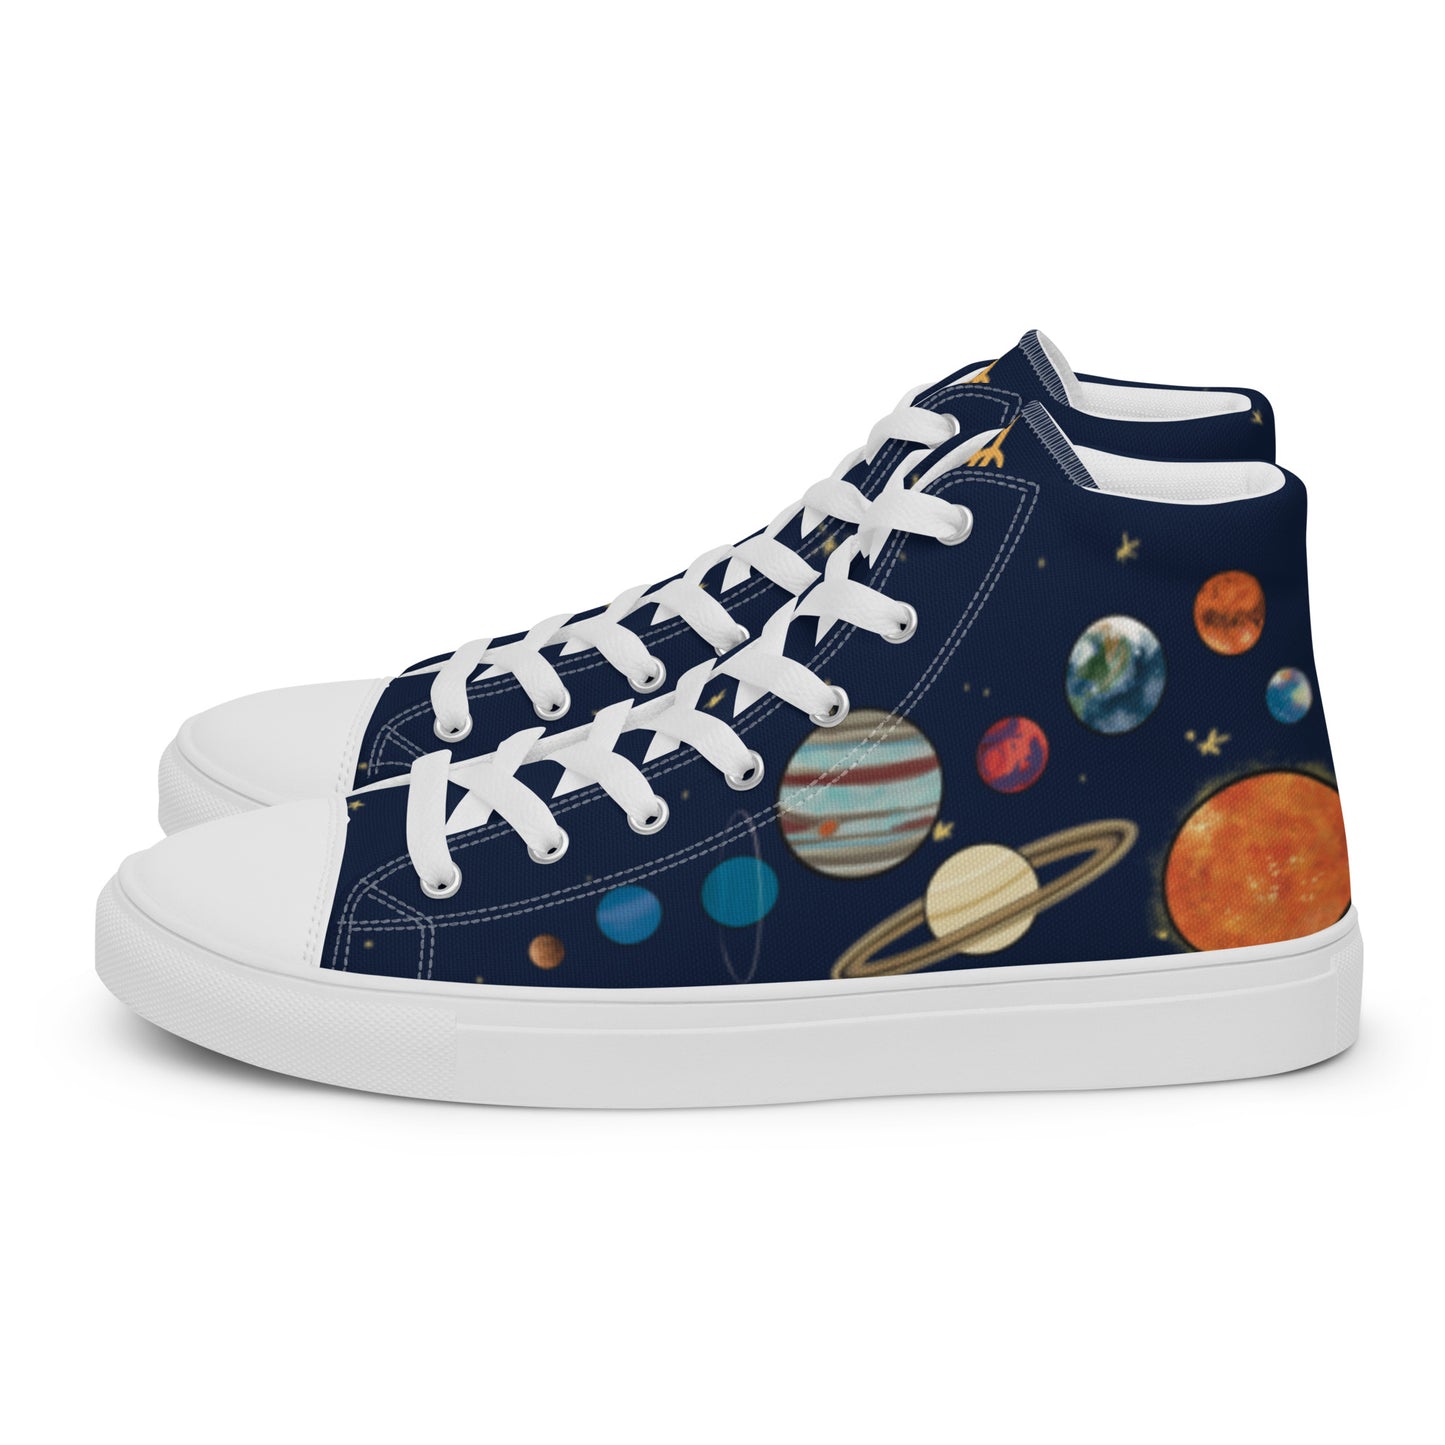 Left view: A pair of high top shoes with painted solar system and starry background with white laces.